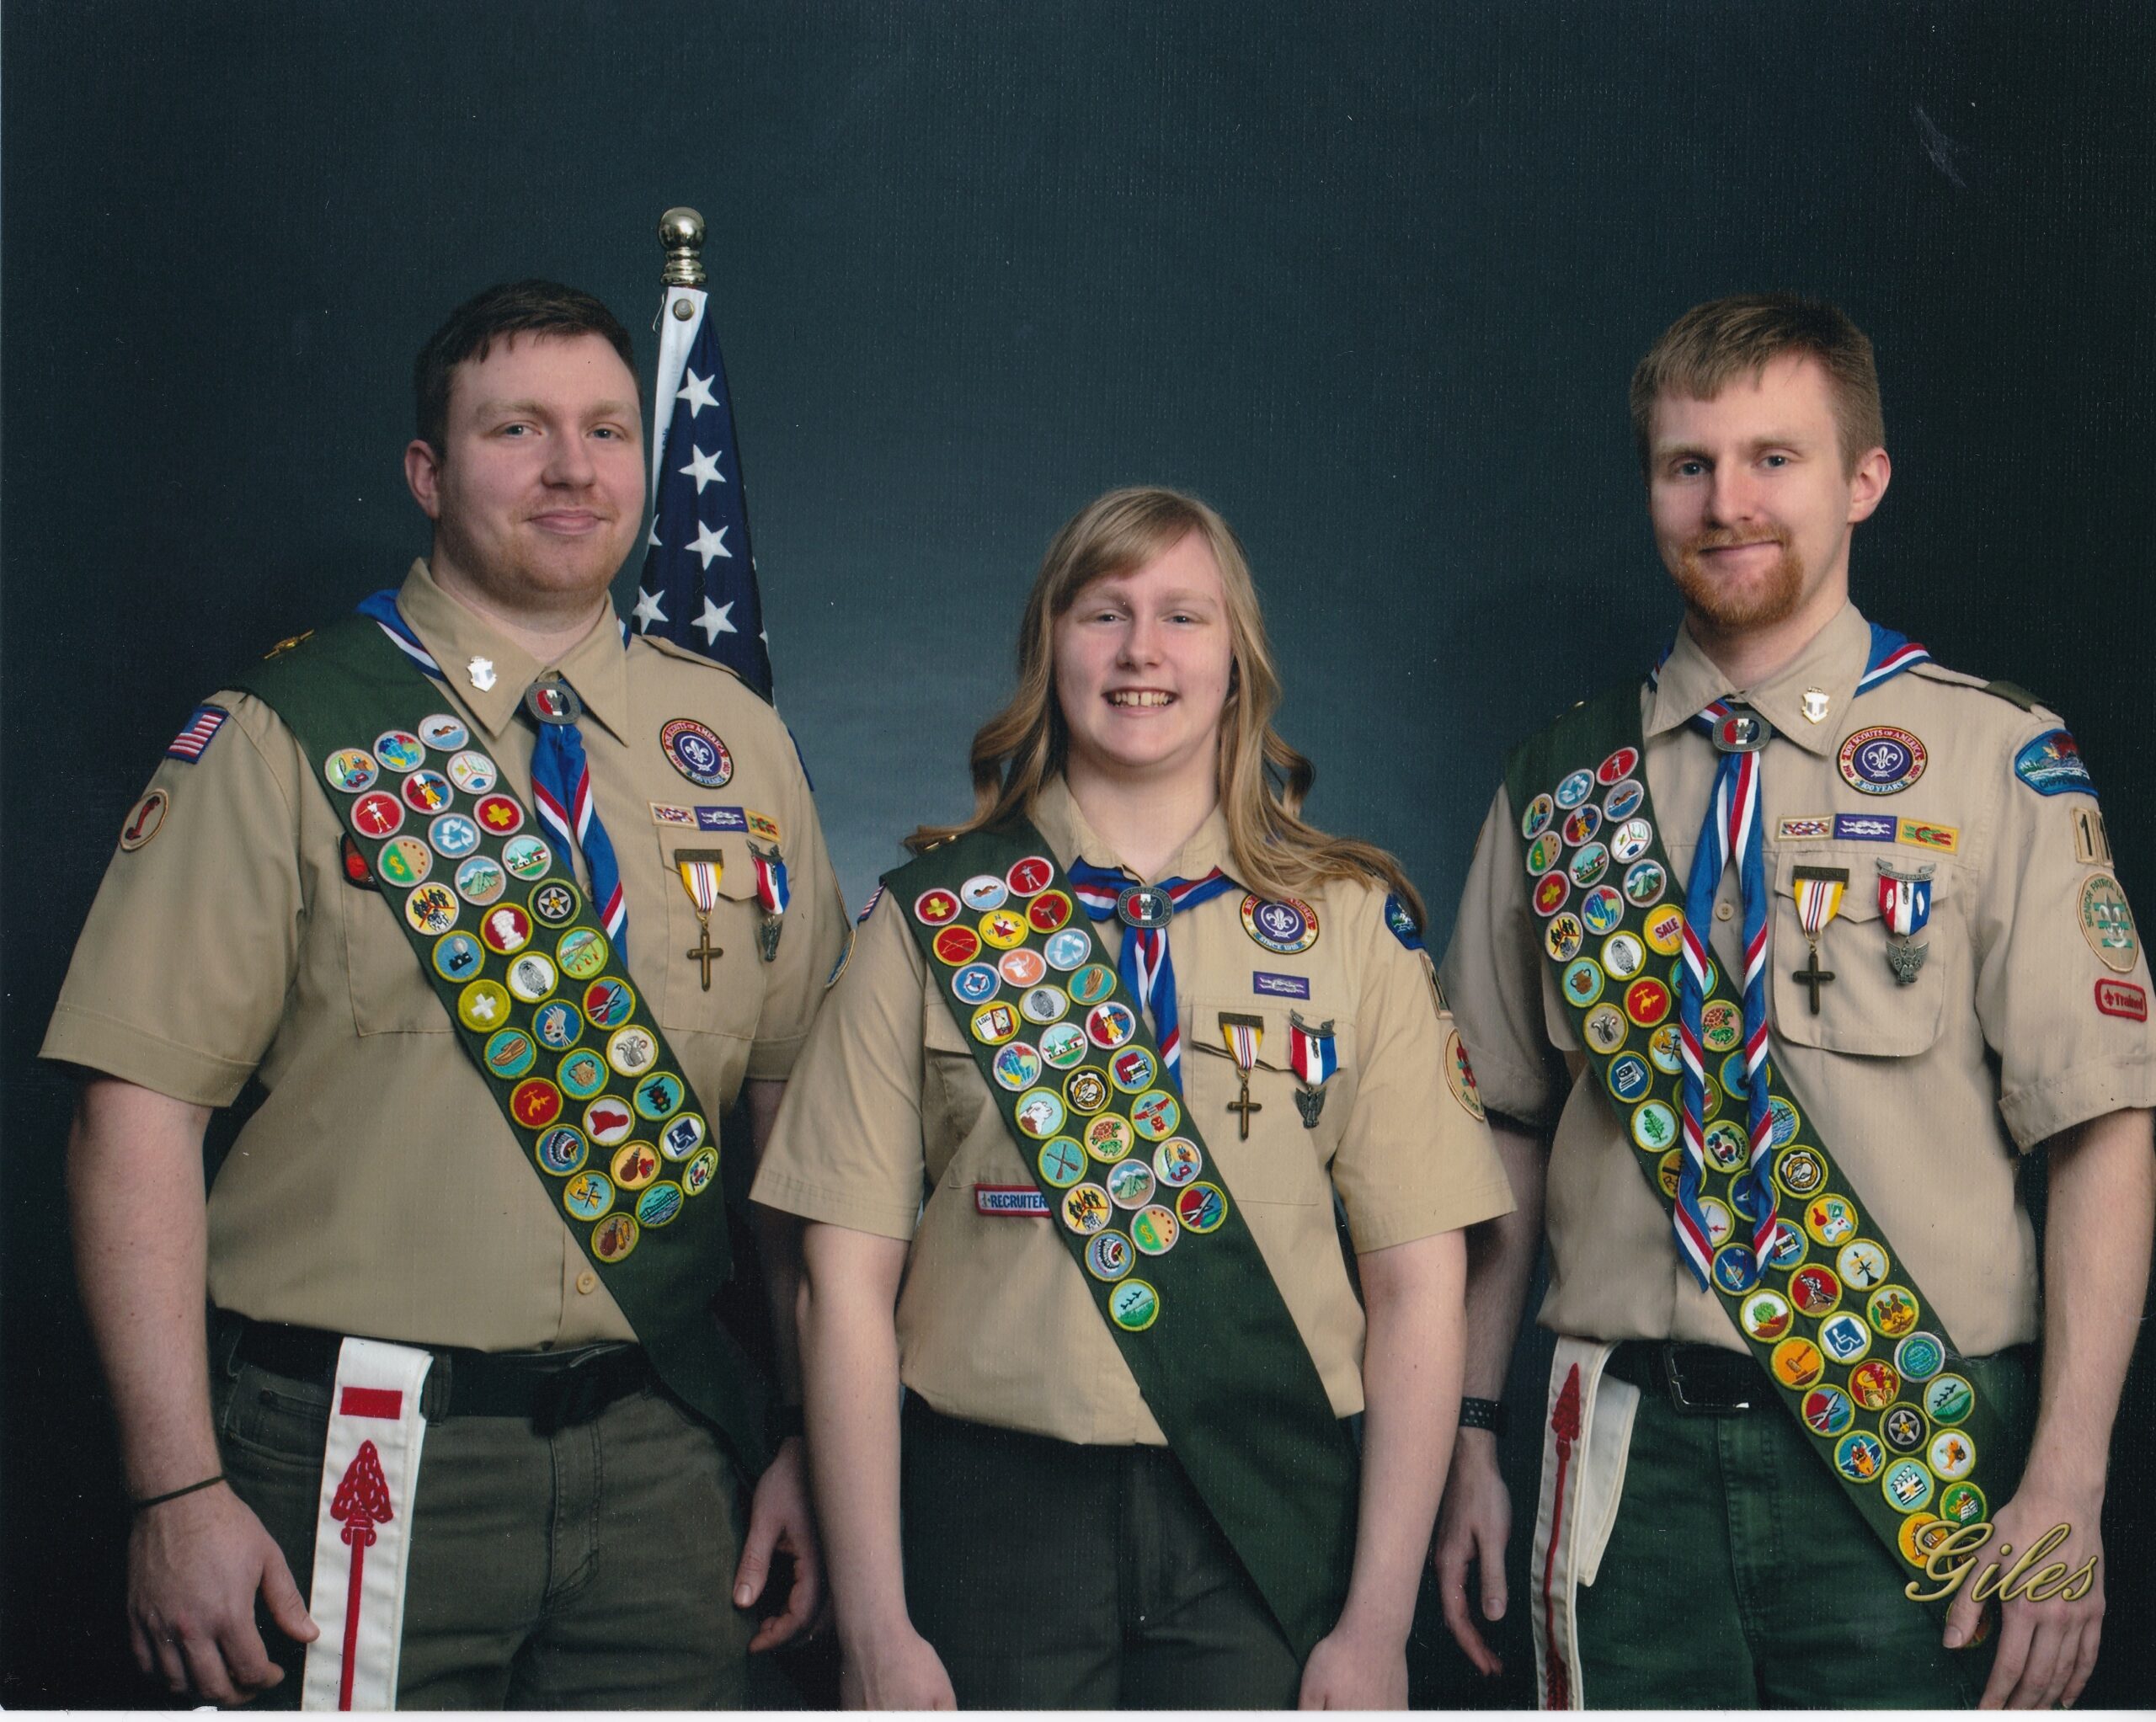 Alyxandria stands with her two brothers on either side of her. They all are wearing Eagle Scout uniforms showing their medals and many badges.